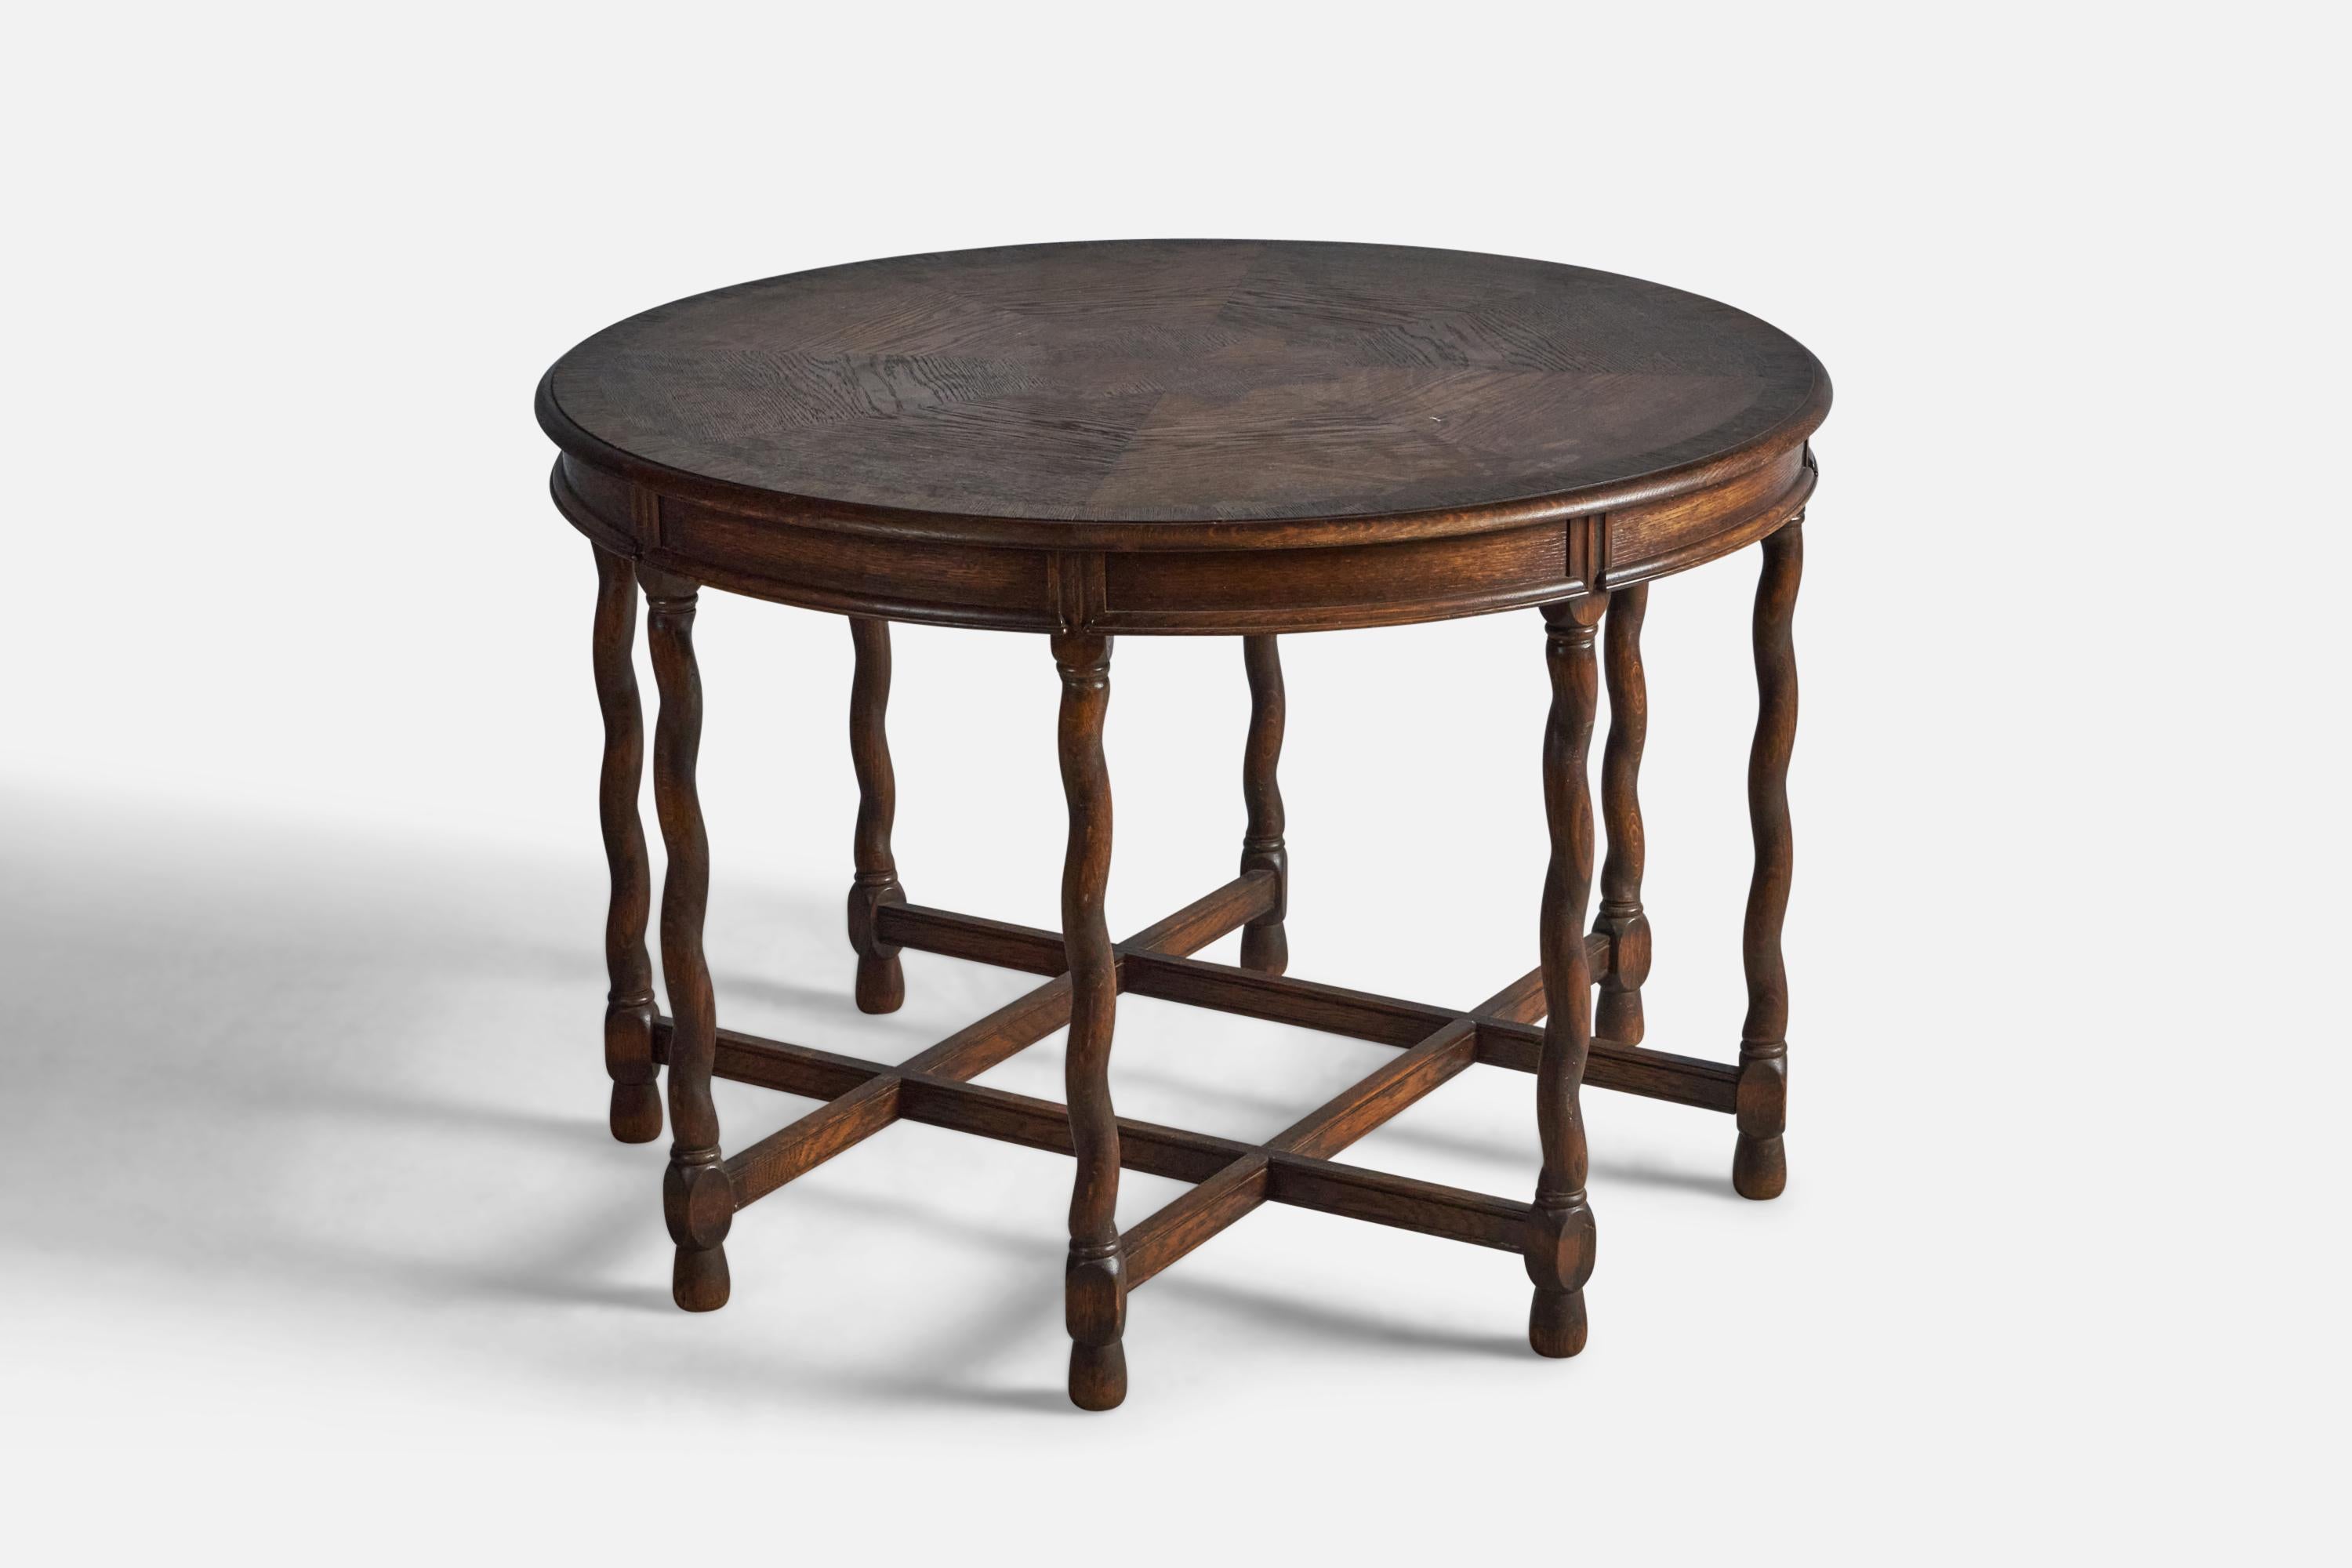 A dark-stained oak table with inlays and carved decoration, designed and produced by Nordiska Kompaniet, c. 1930s.